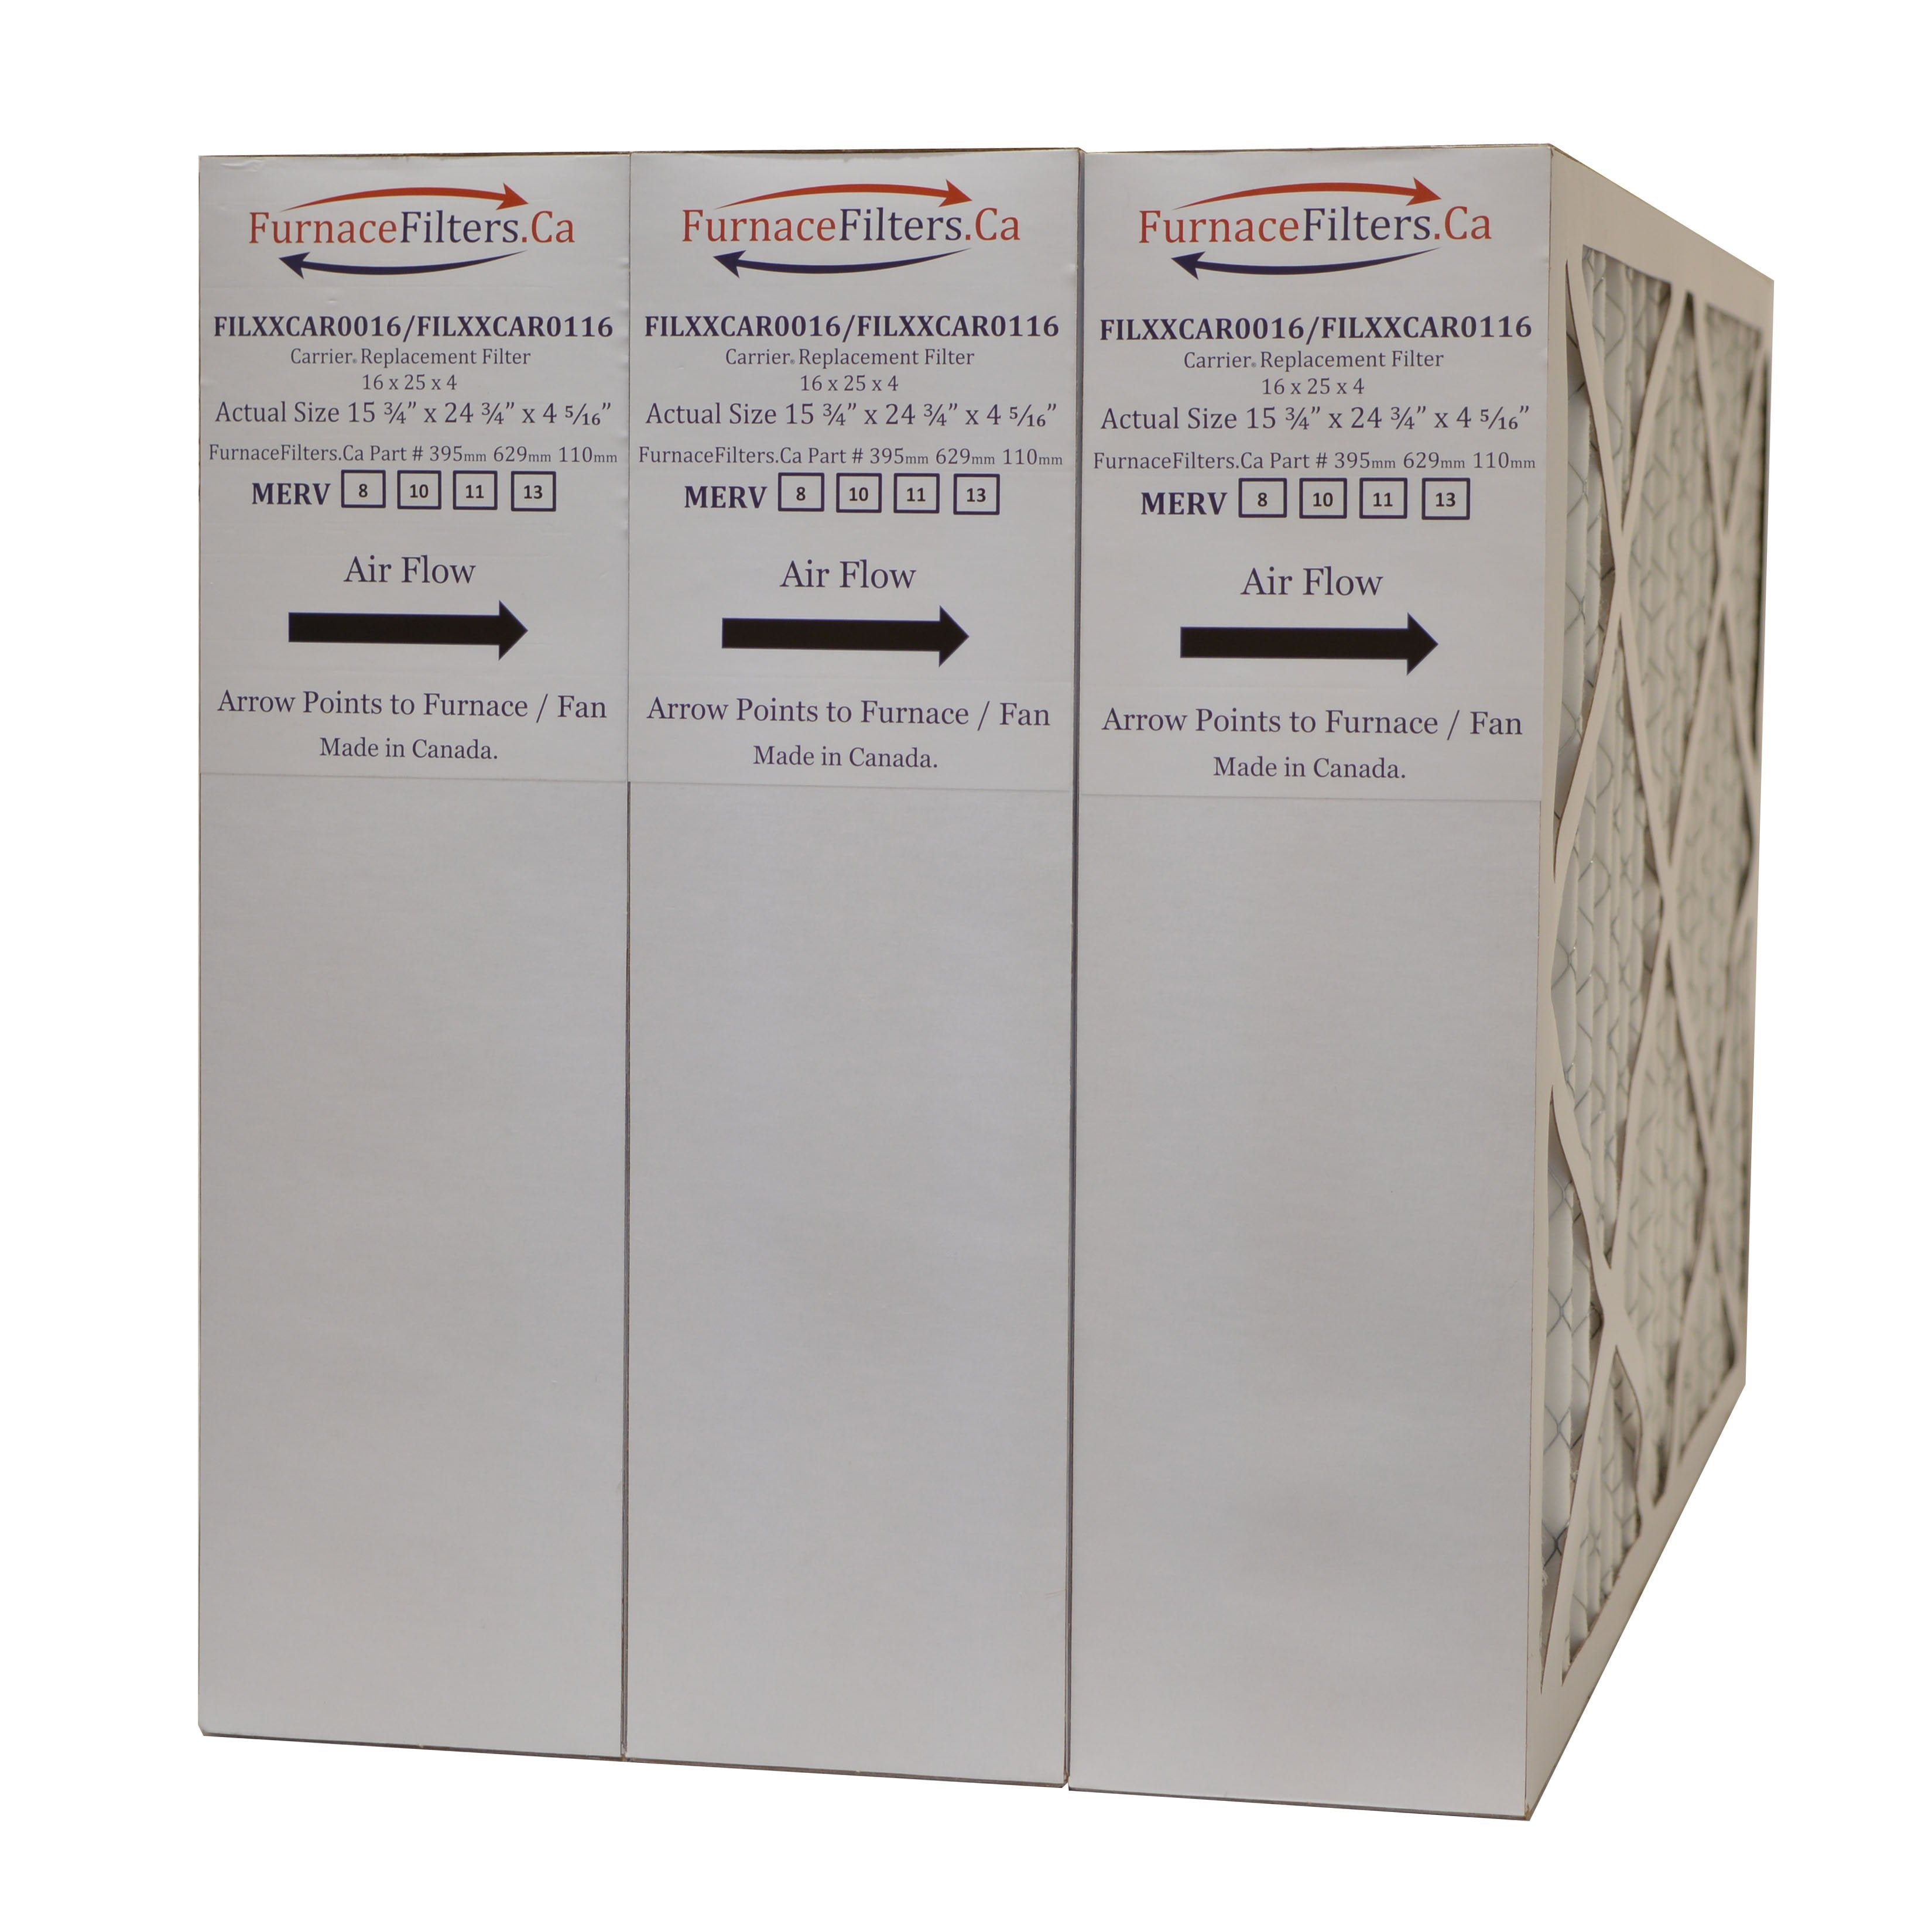 Carrier FILCCCAR0016 Furnace Filter Size 16 x 25 x 4 5/16. MERV 10. - Case of 3 Made in Canada by FurnaceFilters.Ca